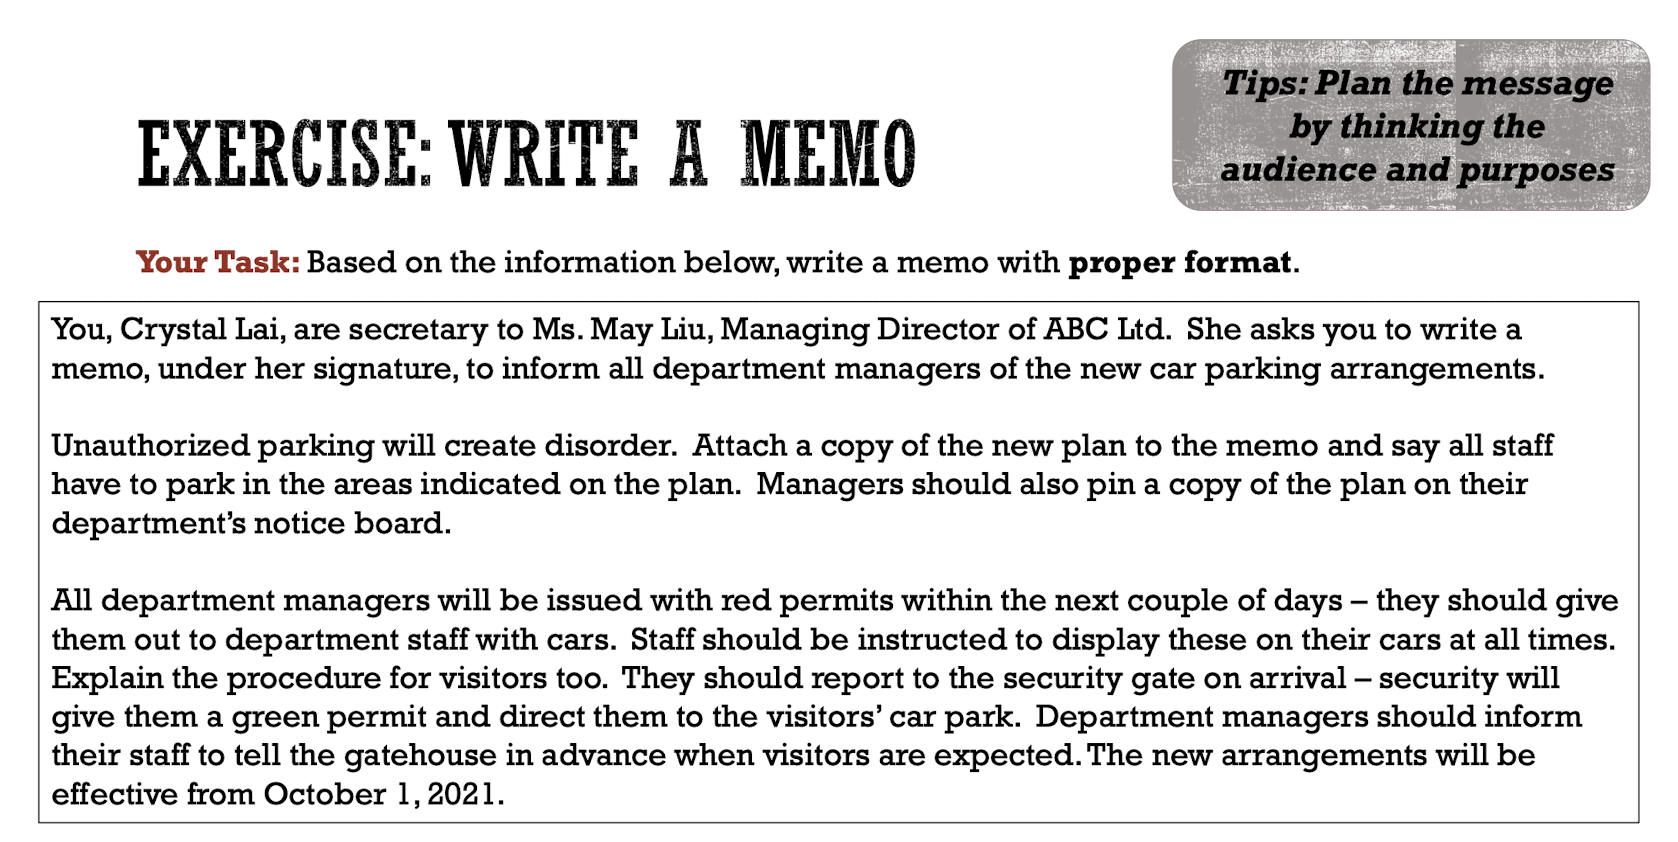 EXERCISE: WRITE A MEMO
Tips: Plan the message
by thinking the
audience and purposes
Your Task: Based on the information below